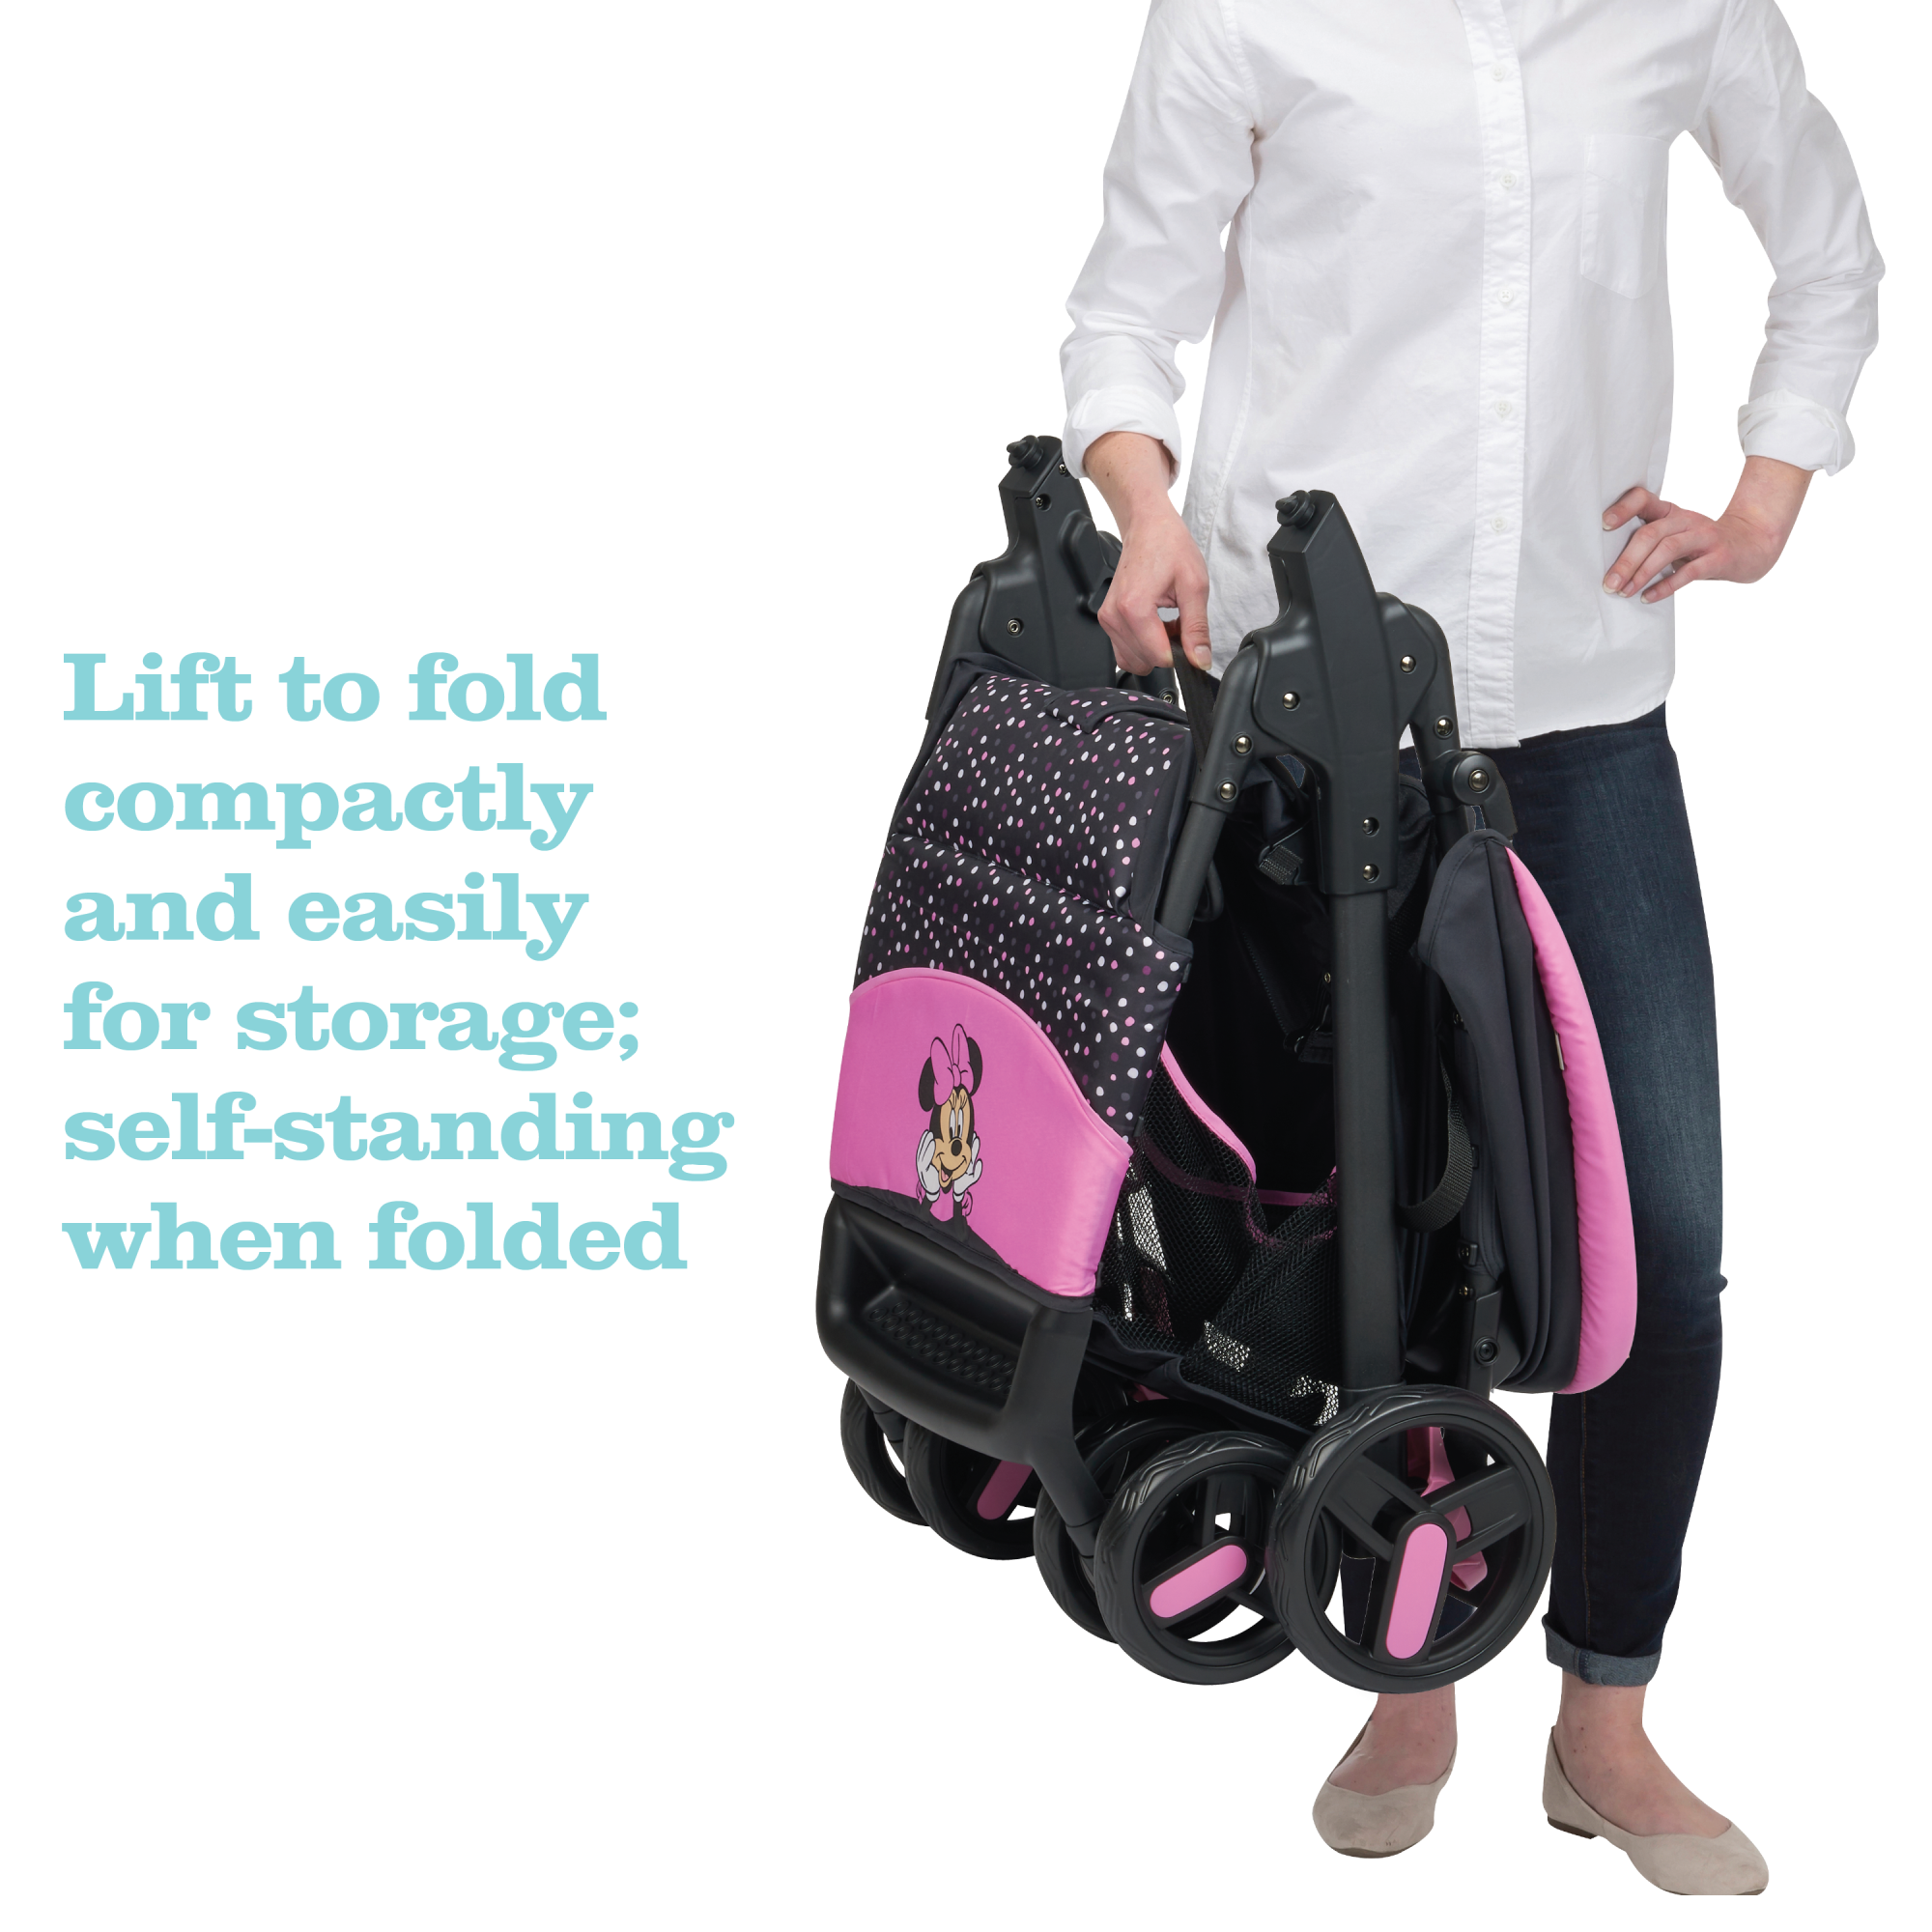 Disney Baby Disney Simple Fold™ LX Travel System - Minnie Dot Party - lift to fold compactly and easily for storage; self-standing when folded